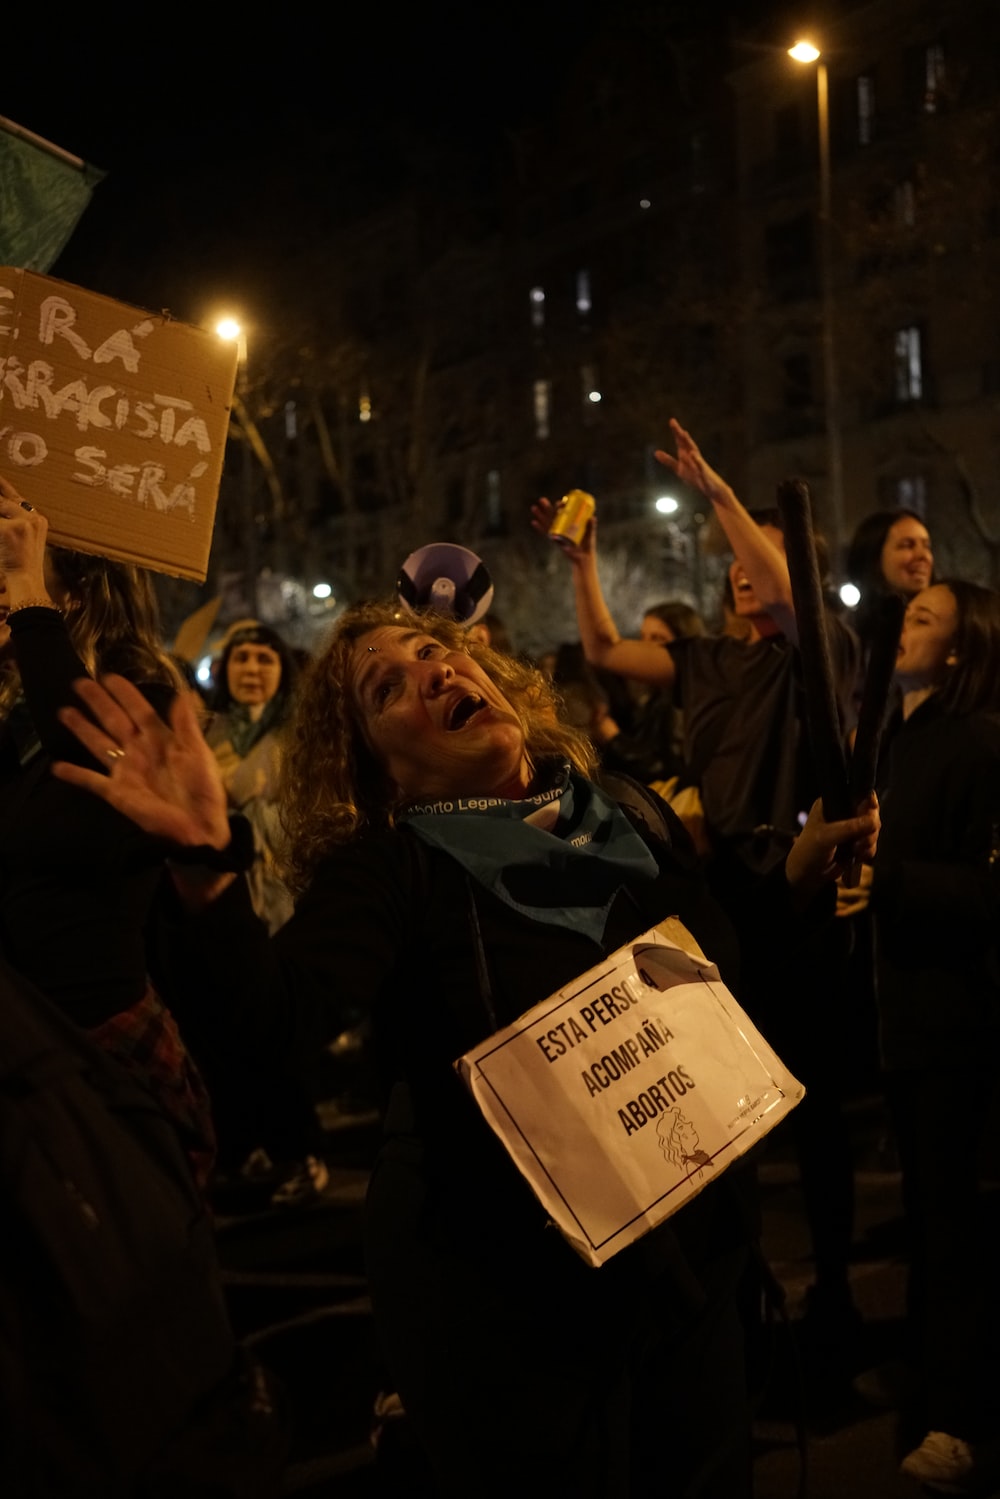 a group of people holding up signs at night